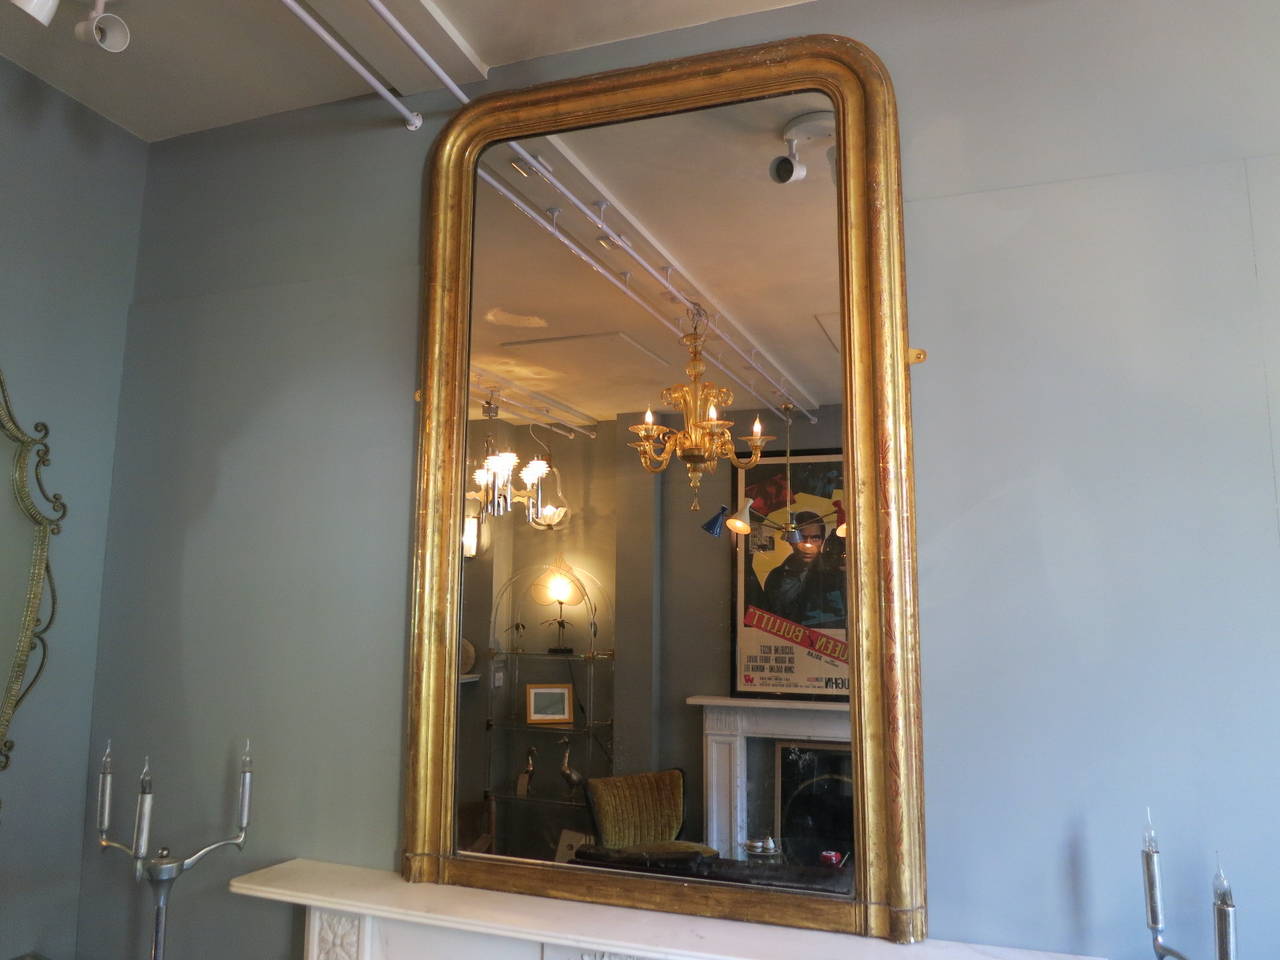 Large French gold gilt domed topped mirror, with original glass. Late 19th century.